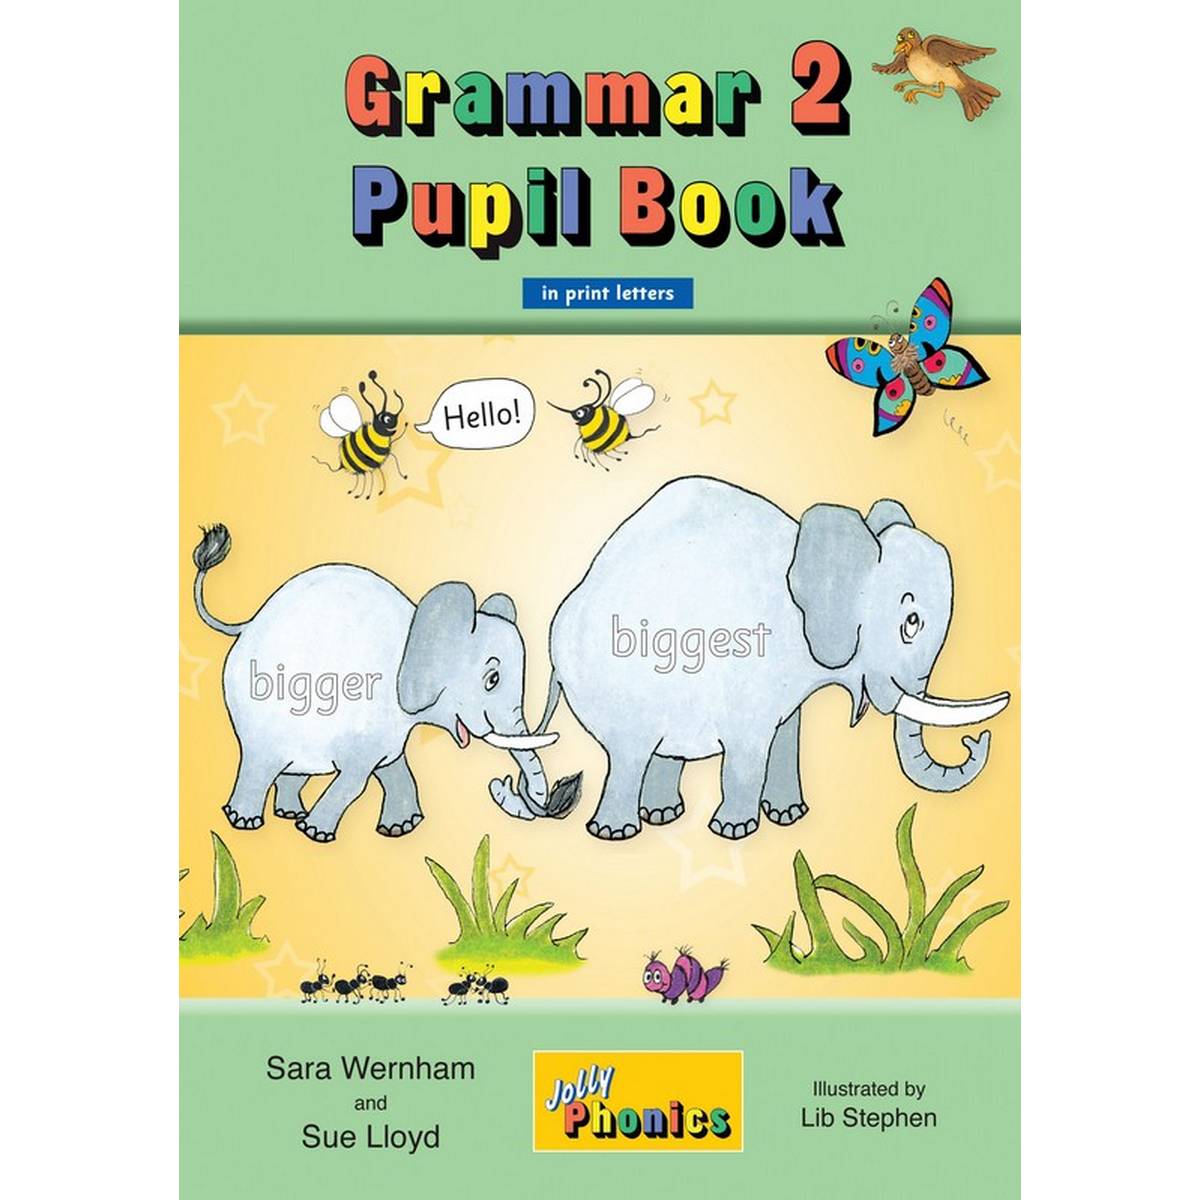 Jolly Grammar 2 Pupils Book (in Print Letters)